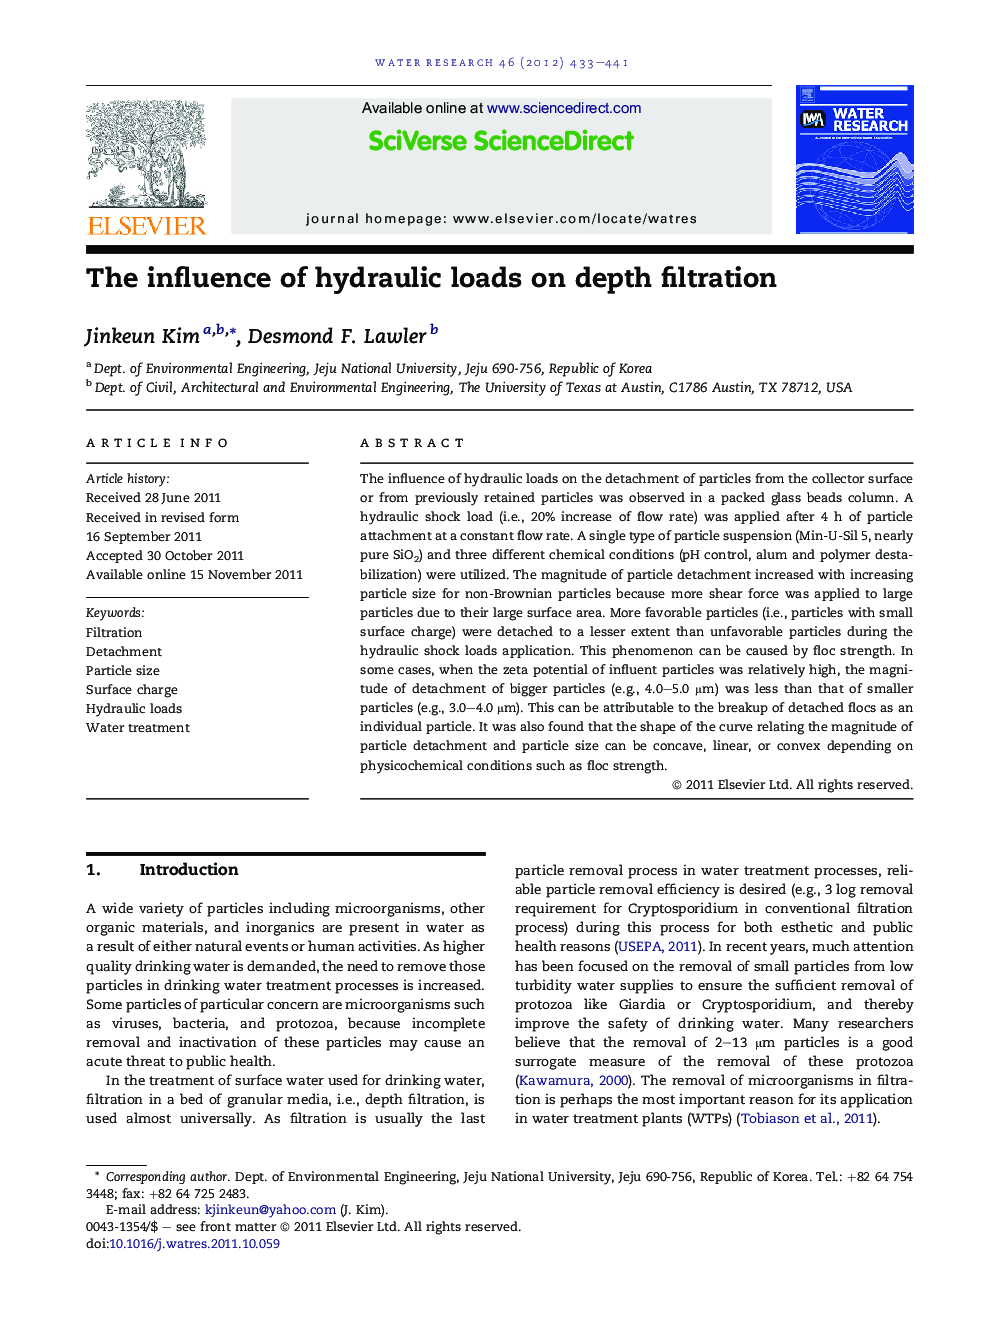 The influence of hydraulic loads on depth filtration